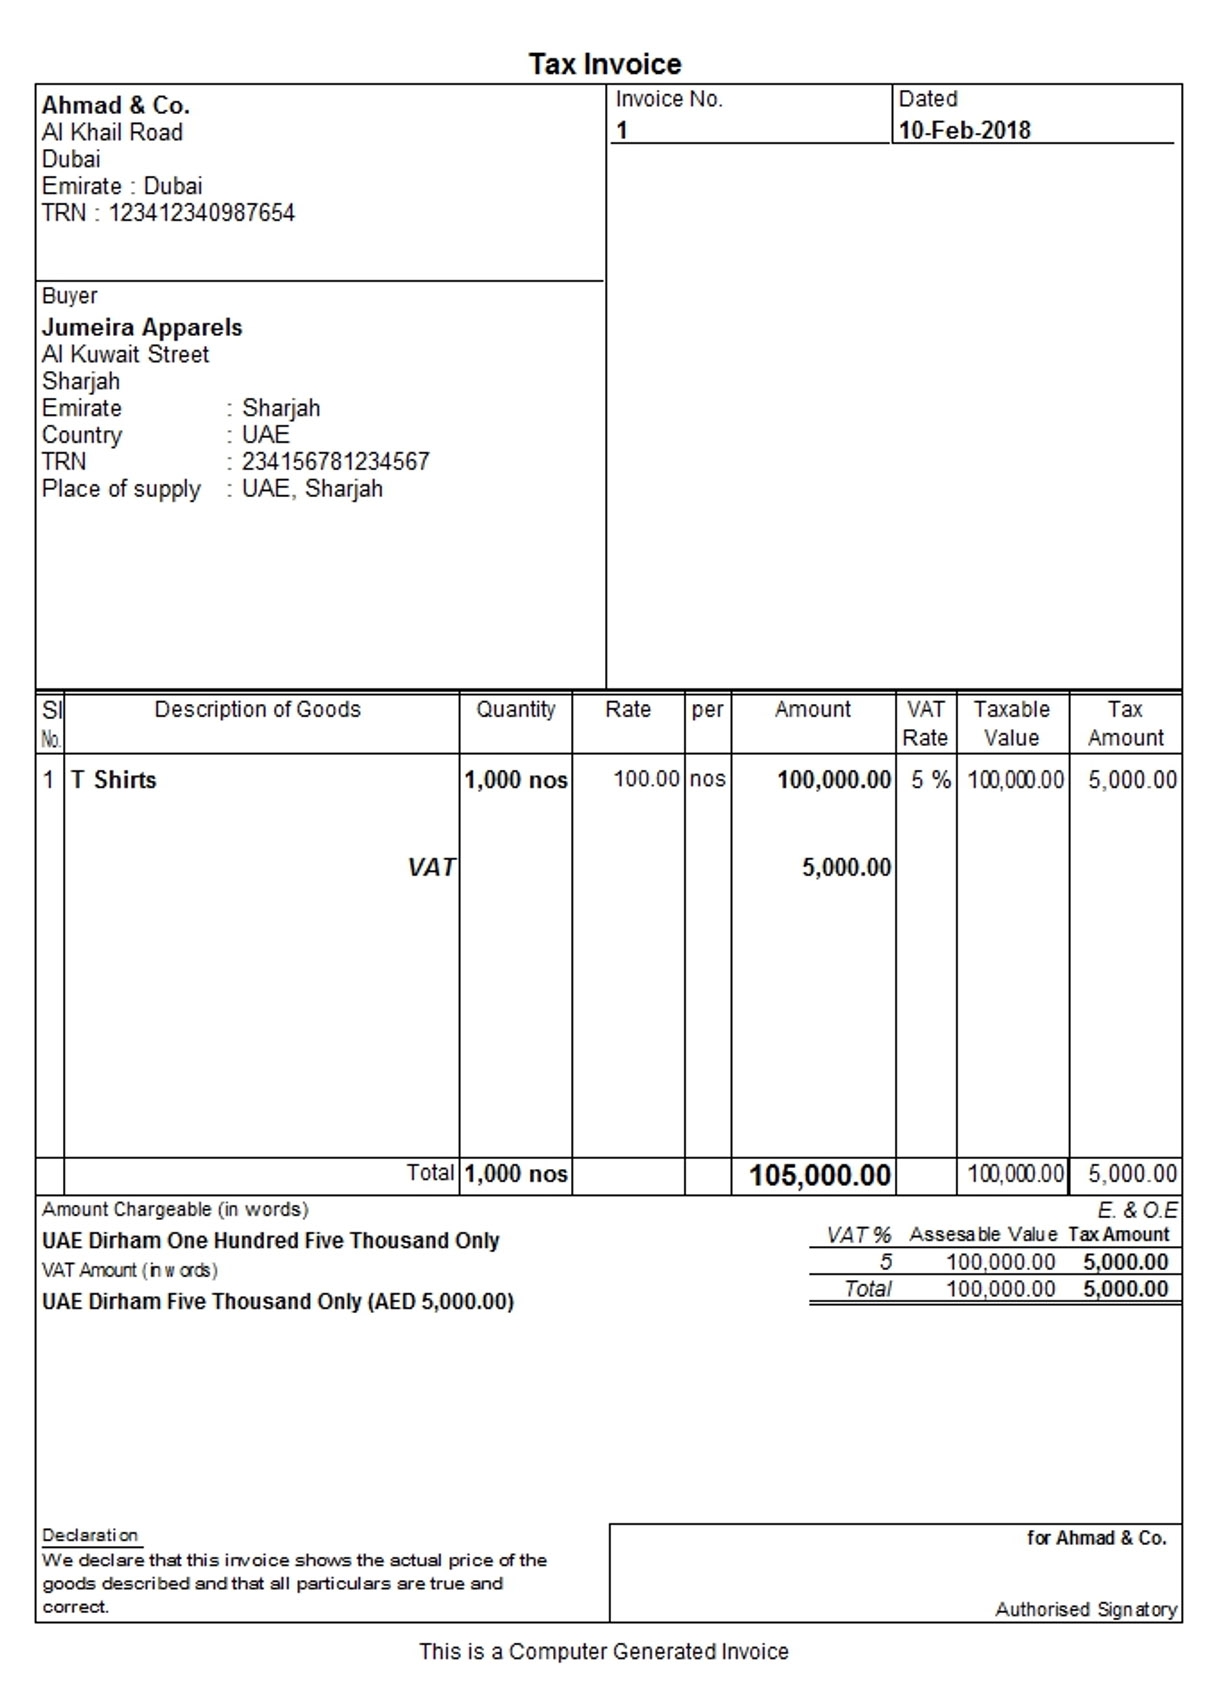 tax invoice to a registered customer under vat in uae invoice but not a tax invoice